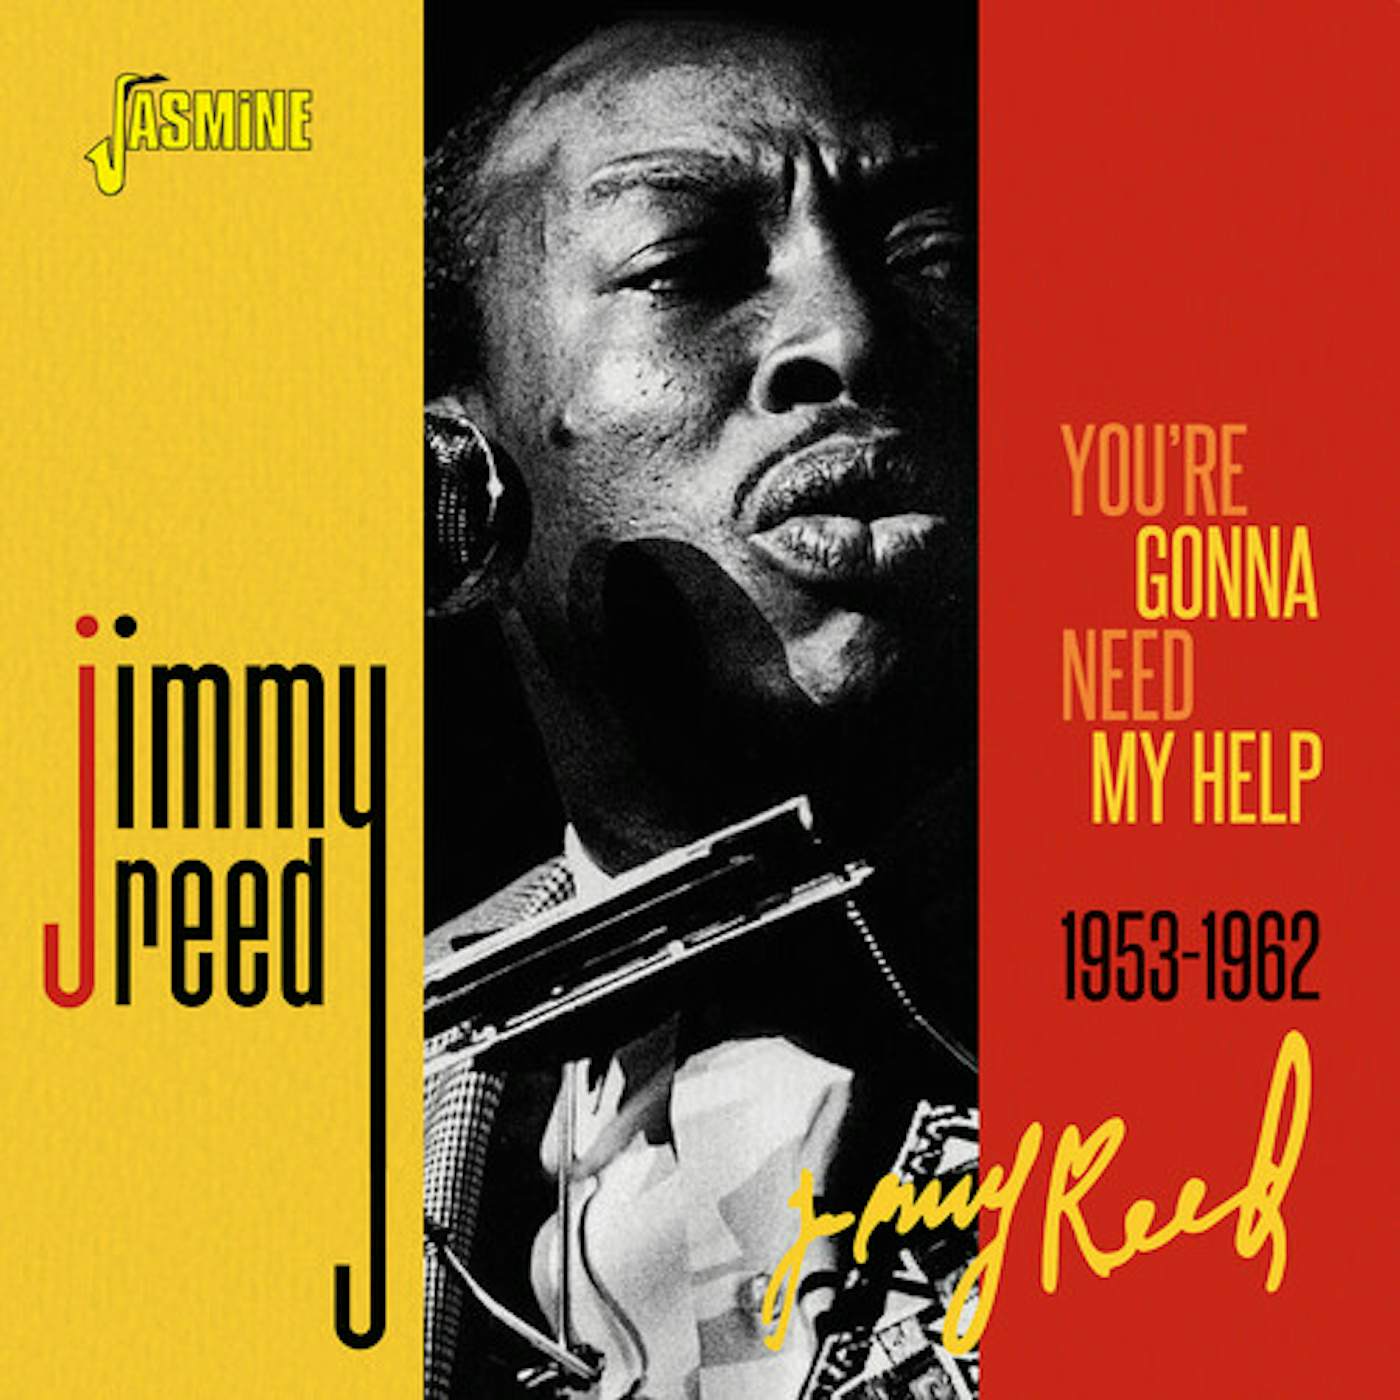 Jimmy Reed YOU'RE GONNA NEED MY HELP 1953-1962 CD